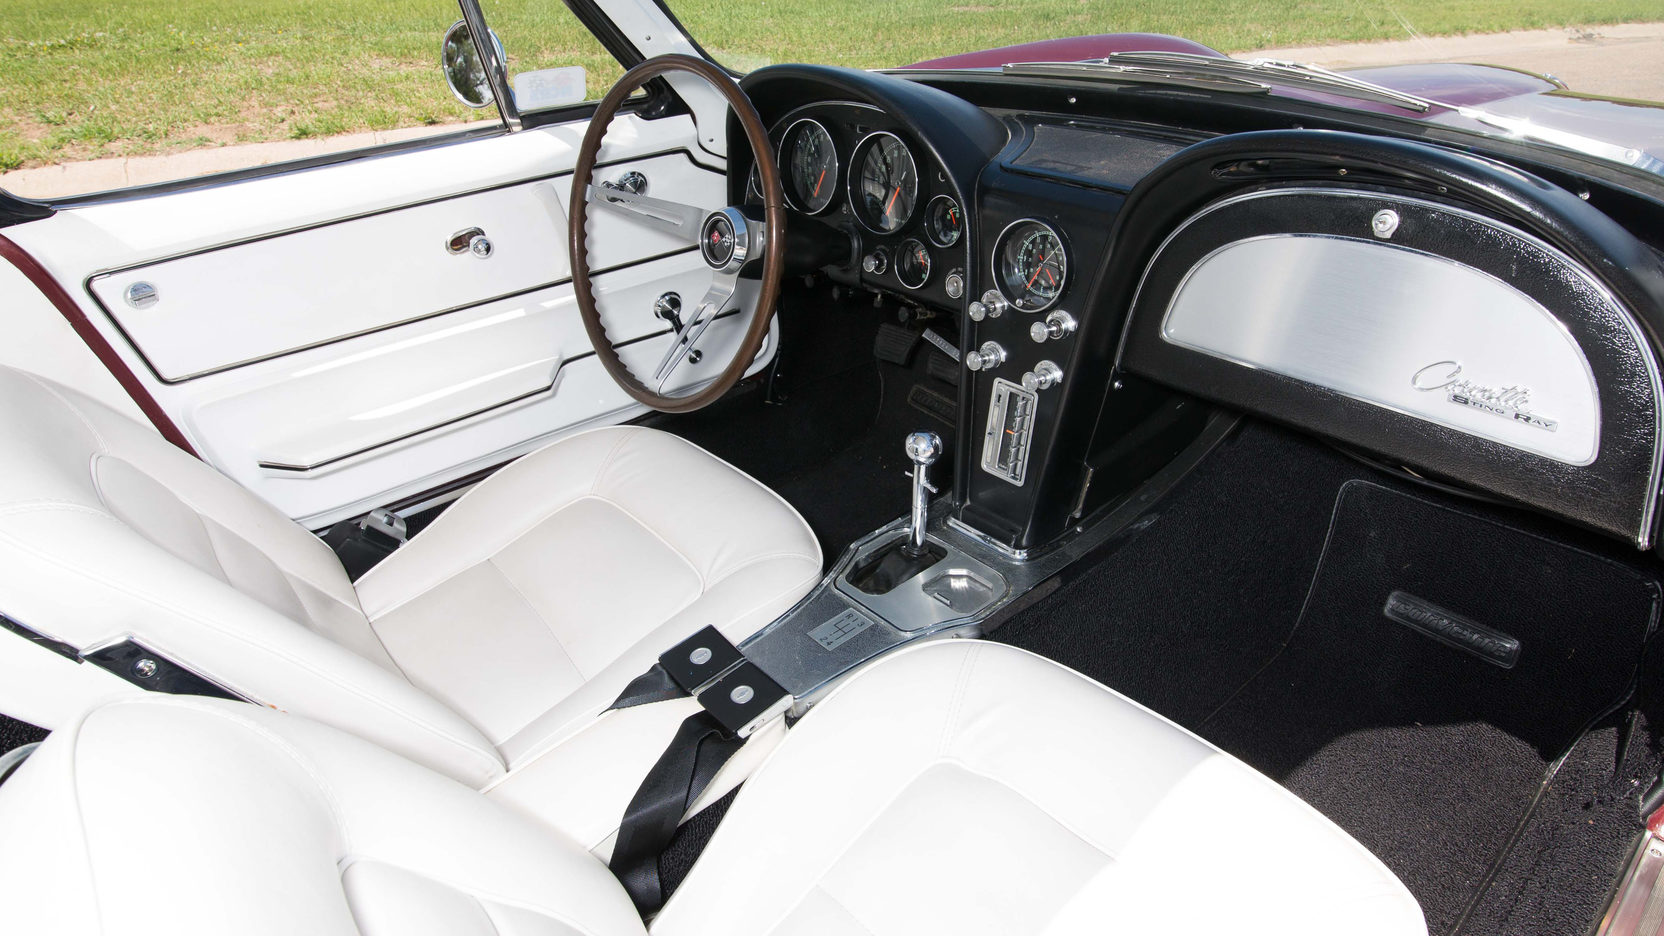 The interior of the Corvette was purposeful and practical. Instruments are directly in the driver's line of sight and are simple, large and clear.